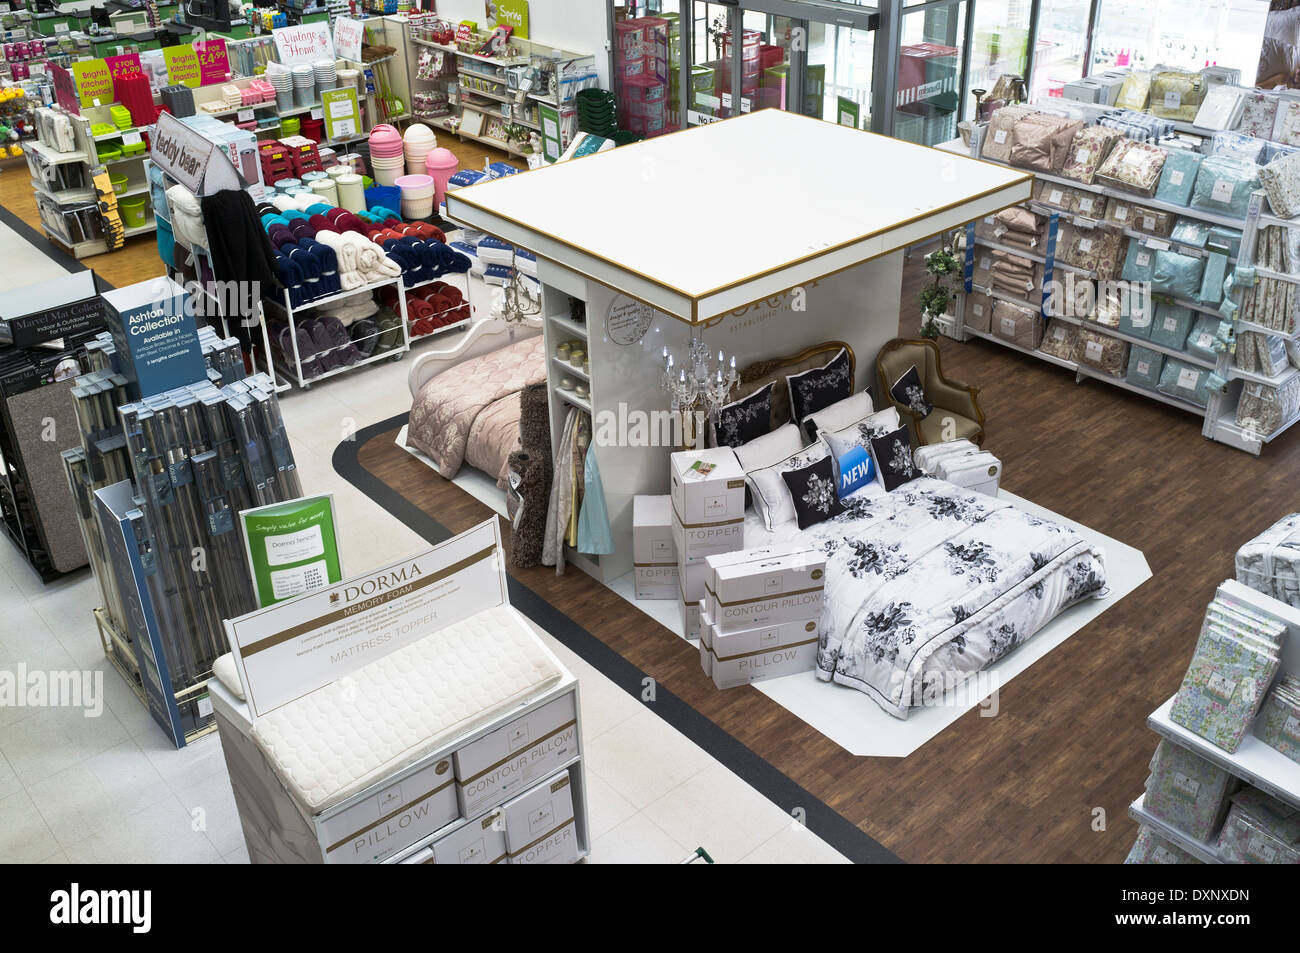 dh Dunelm Mill SHOP UK Bedding shop display interior displaying bed linen stand shops retail floor displays inside store Stock Photo